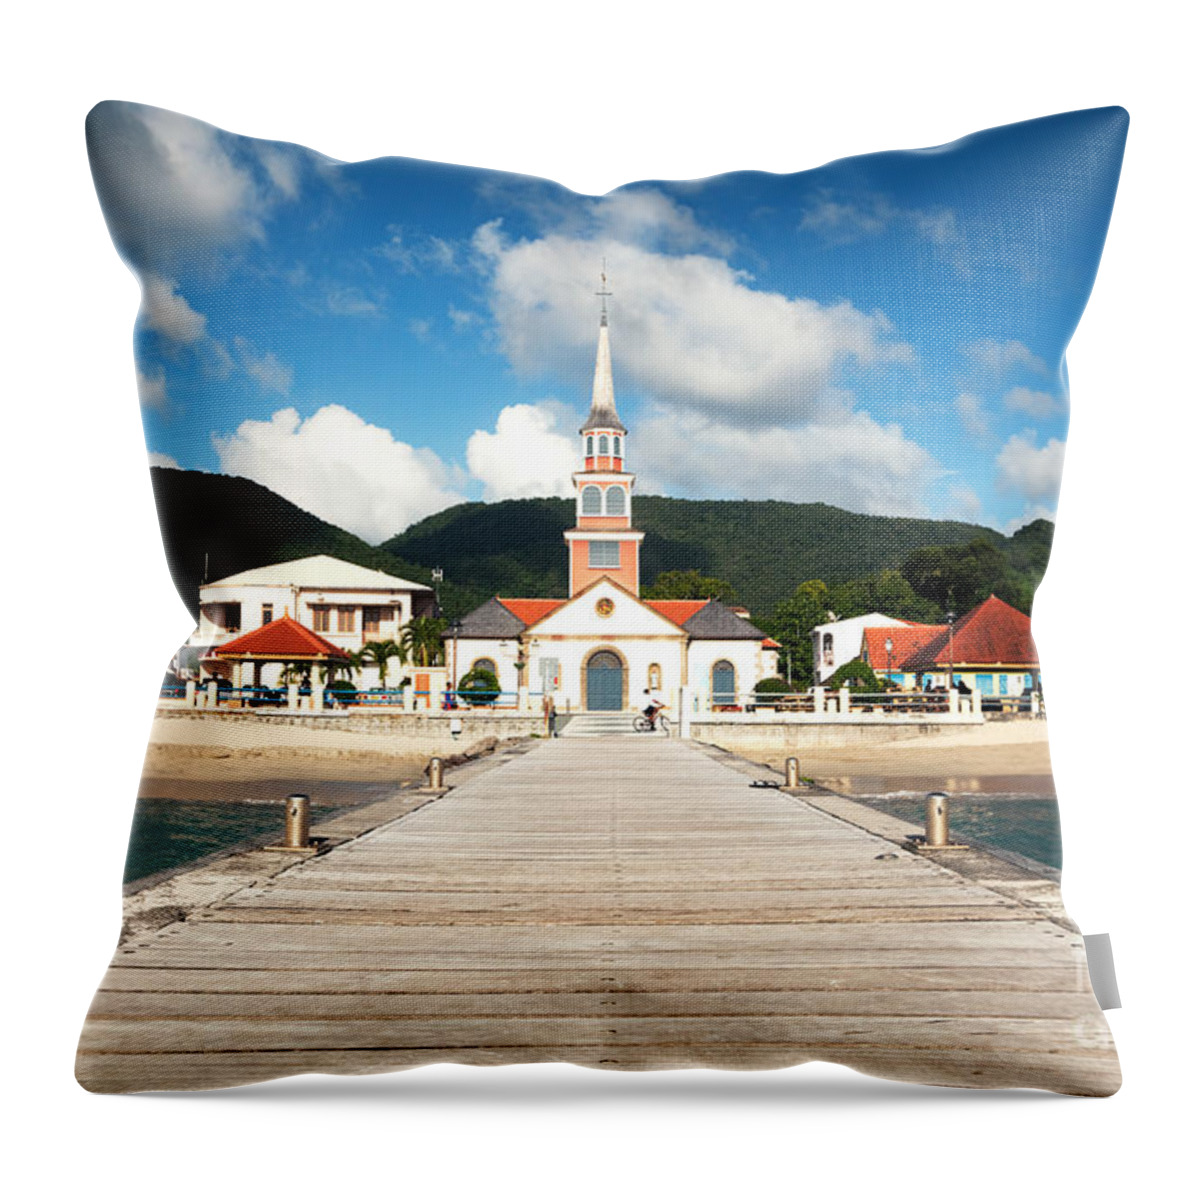 Landscape Throw Pillow featuring the photograph Pier to the island by Matteo Colombo